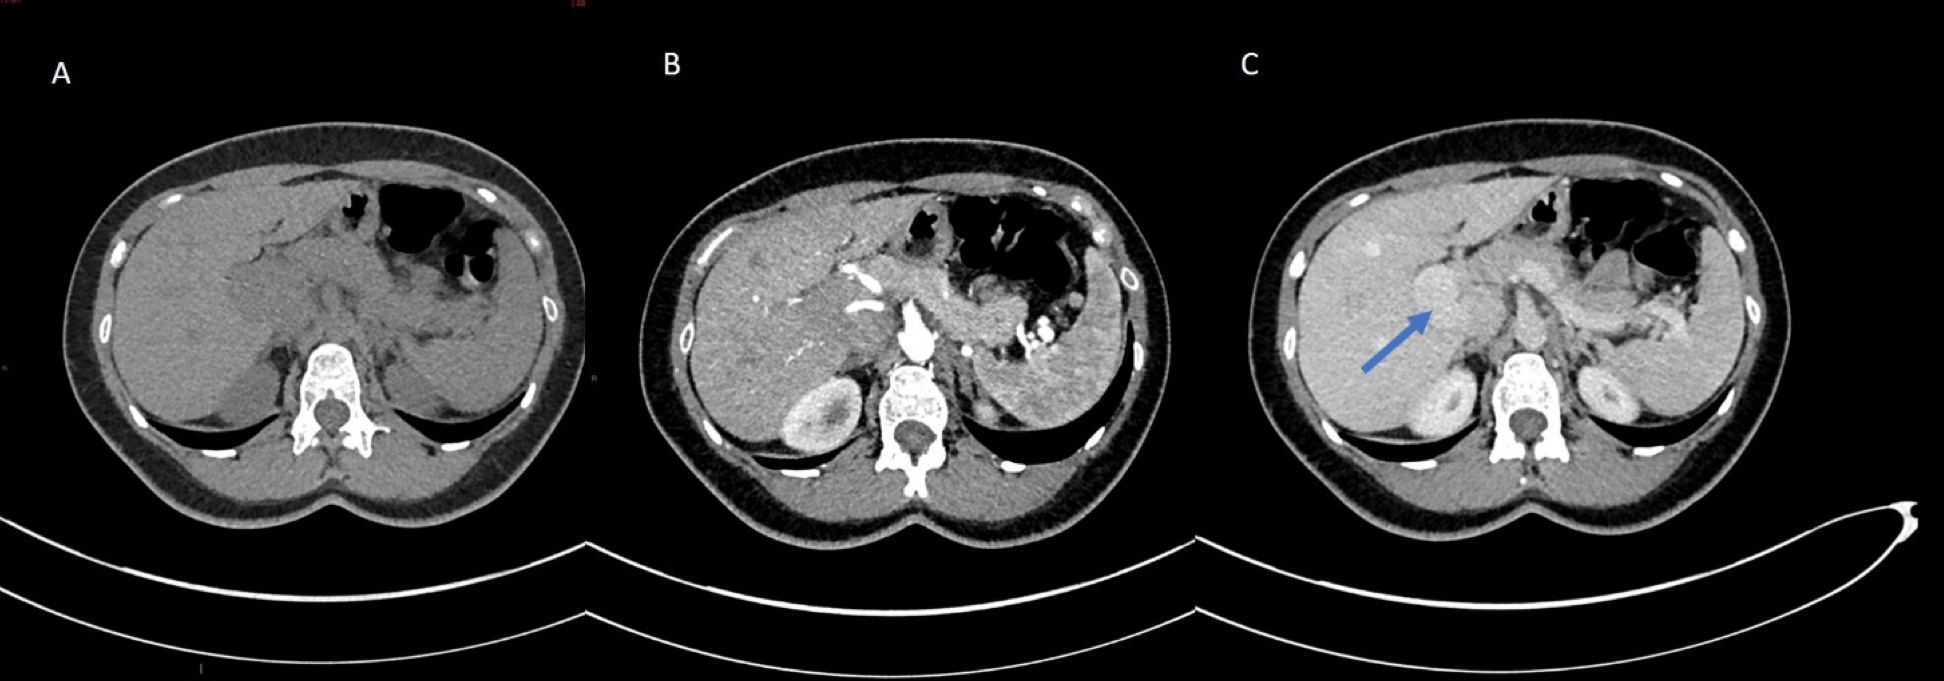 Congenital porto-systemic shunt as a cause of elevated manganese in adults </br> [Oct/Nov 2020]